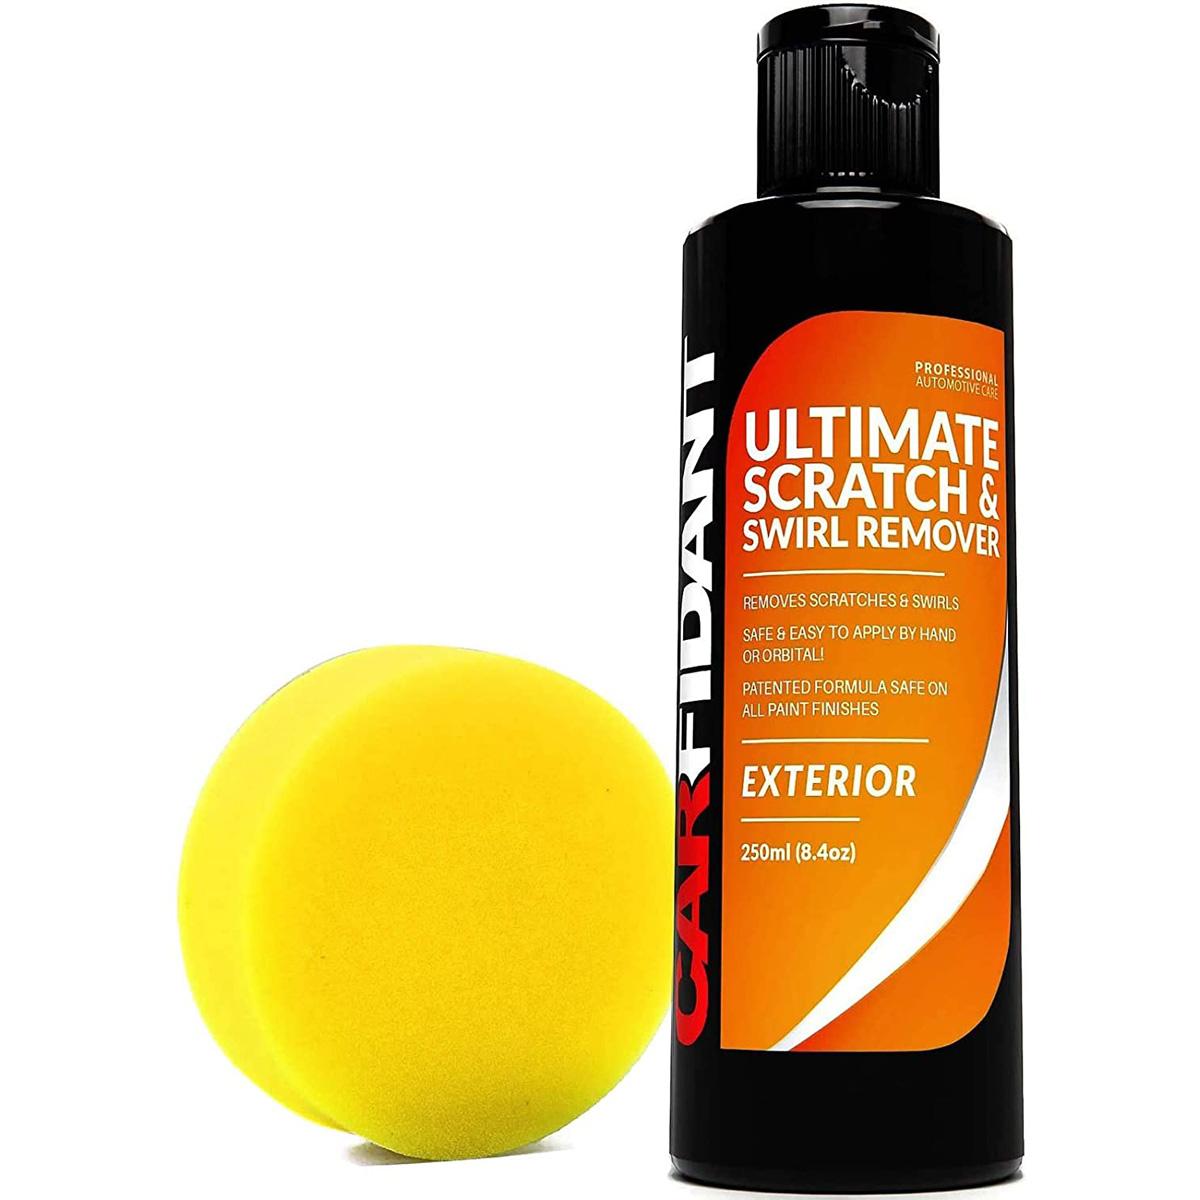 Carfidant Scratch and Swirl Remover for $15.96